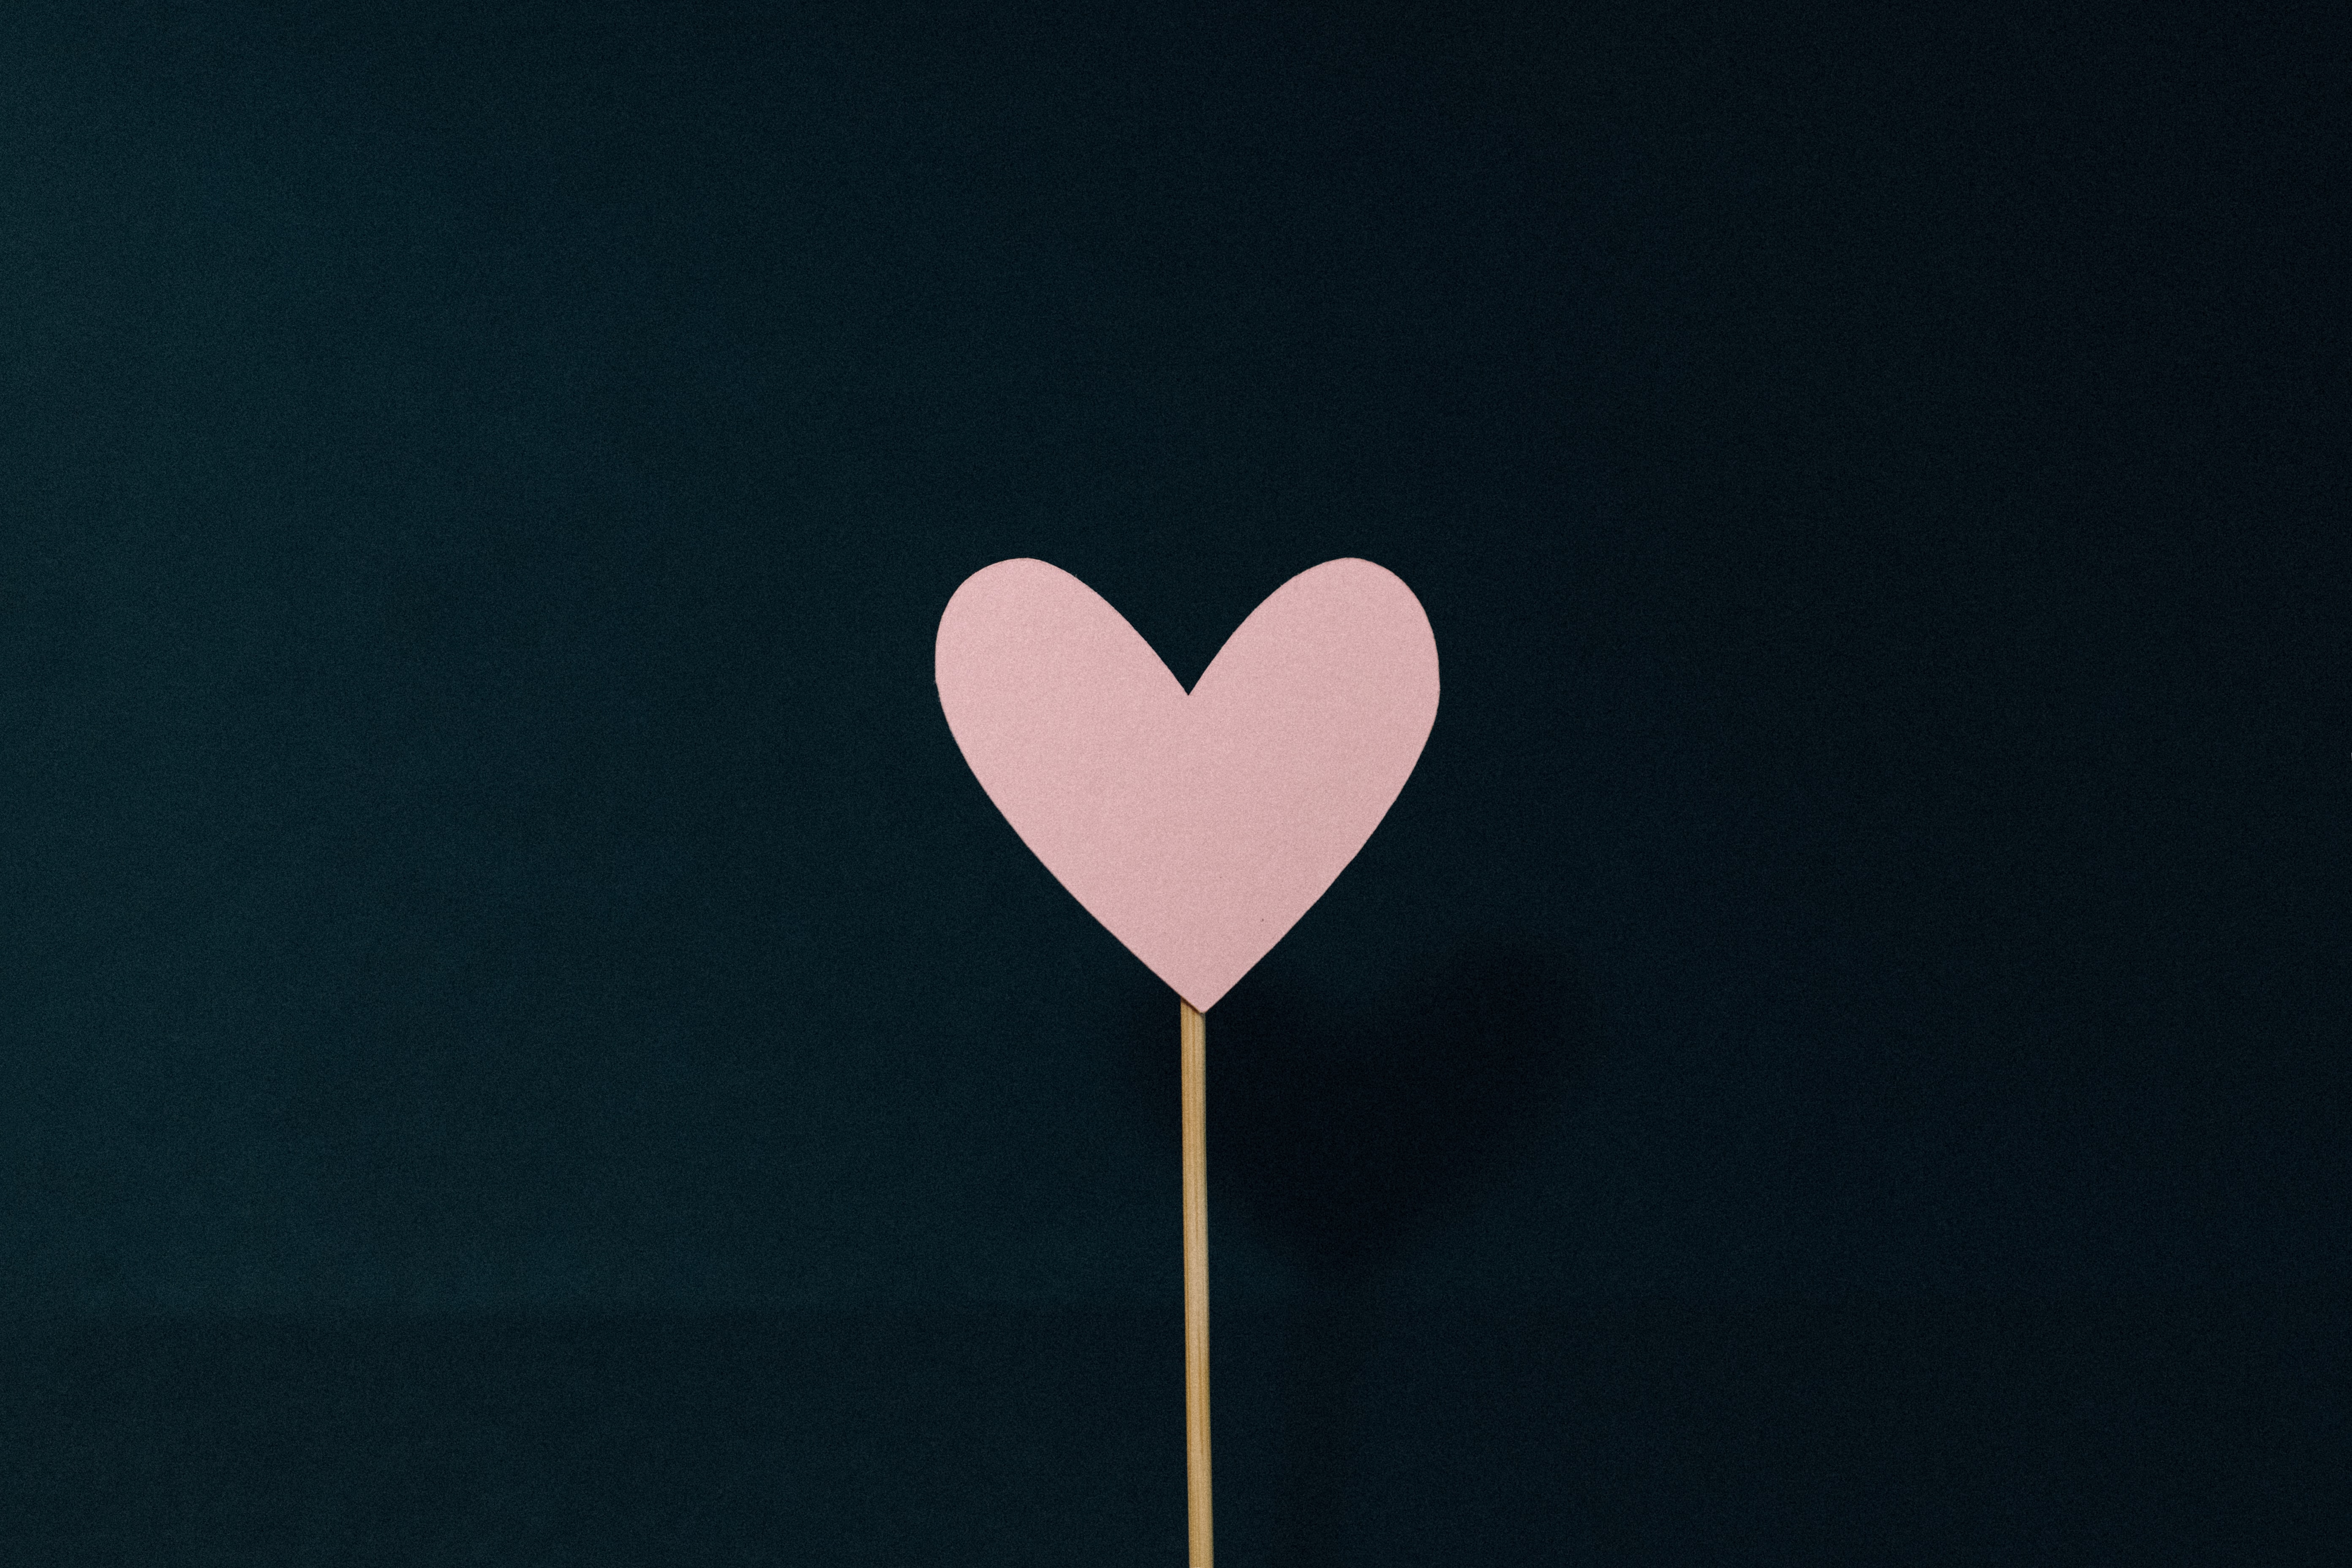 A light pink paper heart on a stick, against a black background